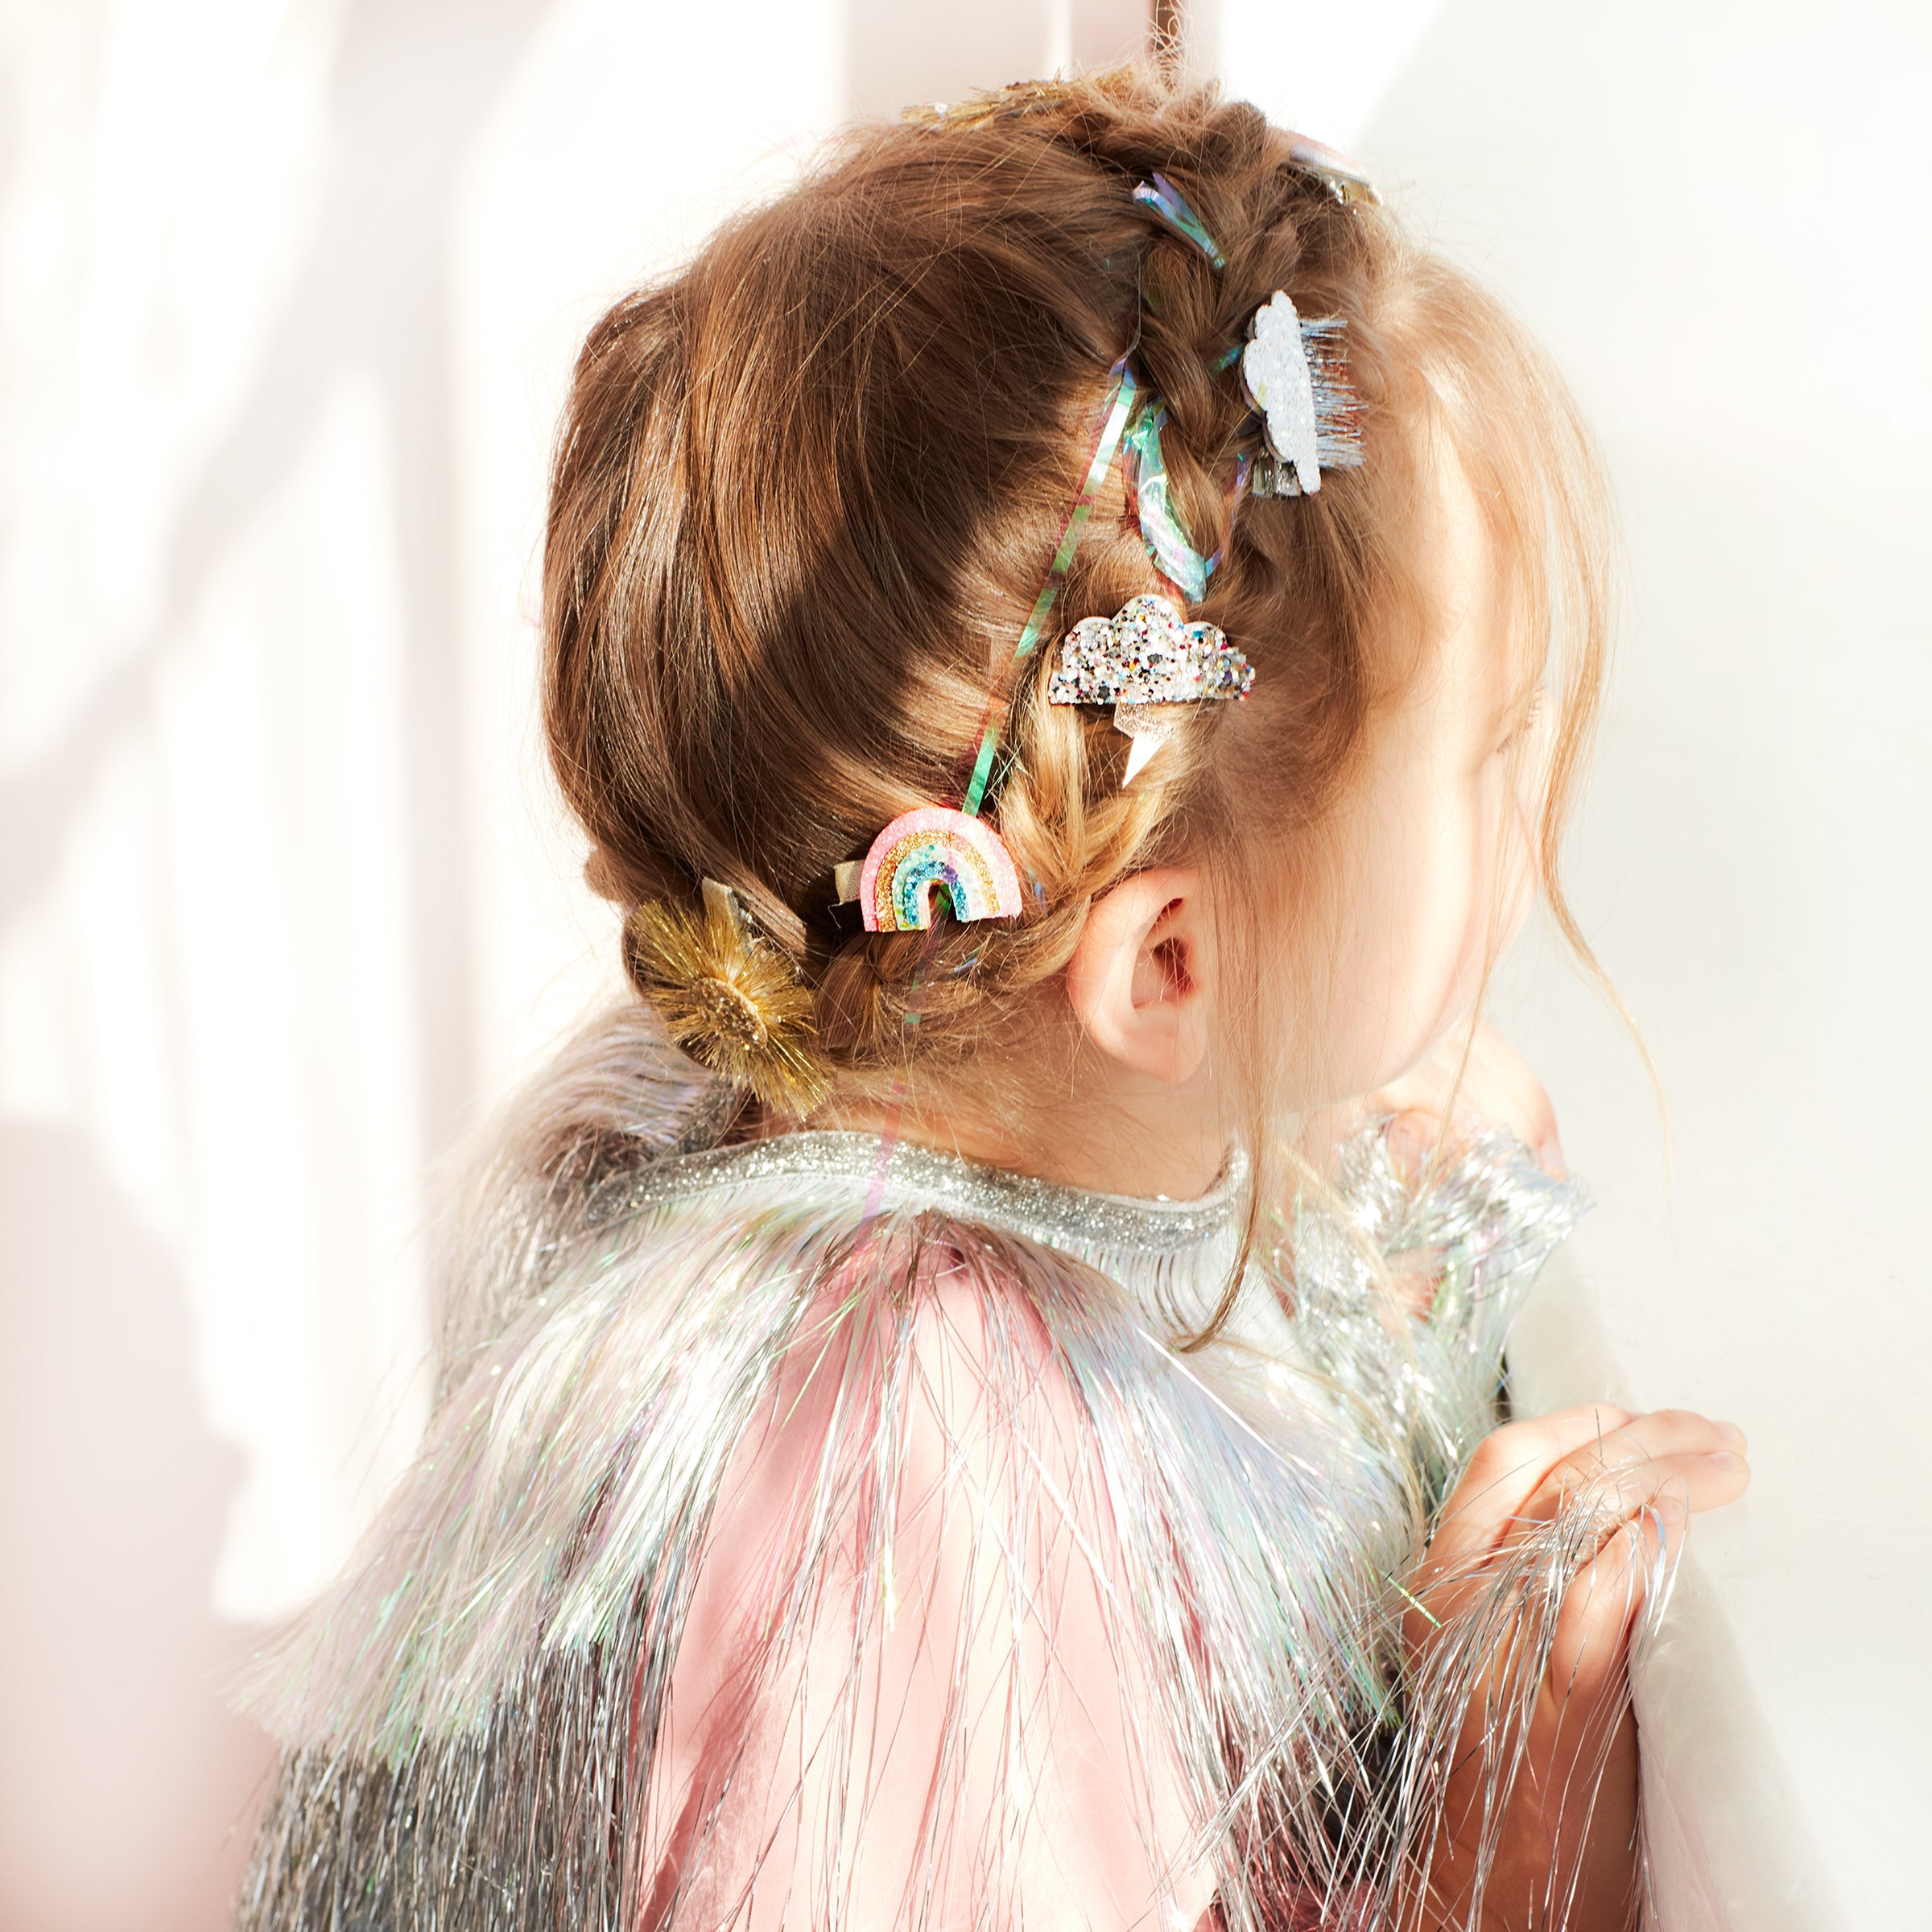 Our glittery kids hair acessories make wonderful party favors.